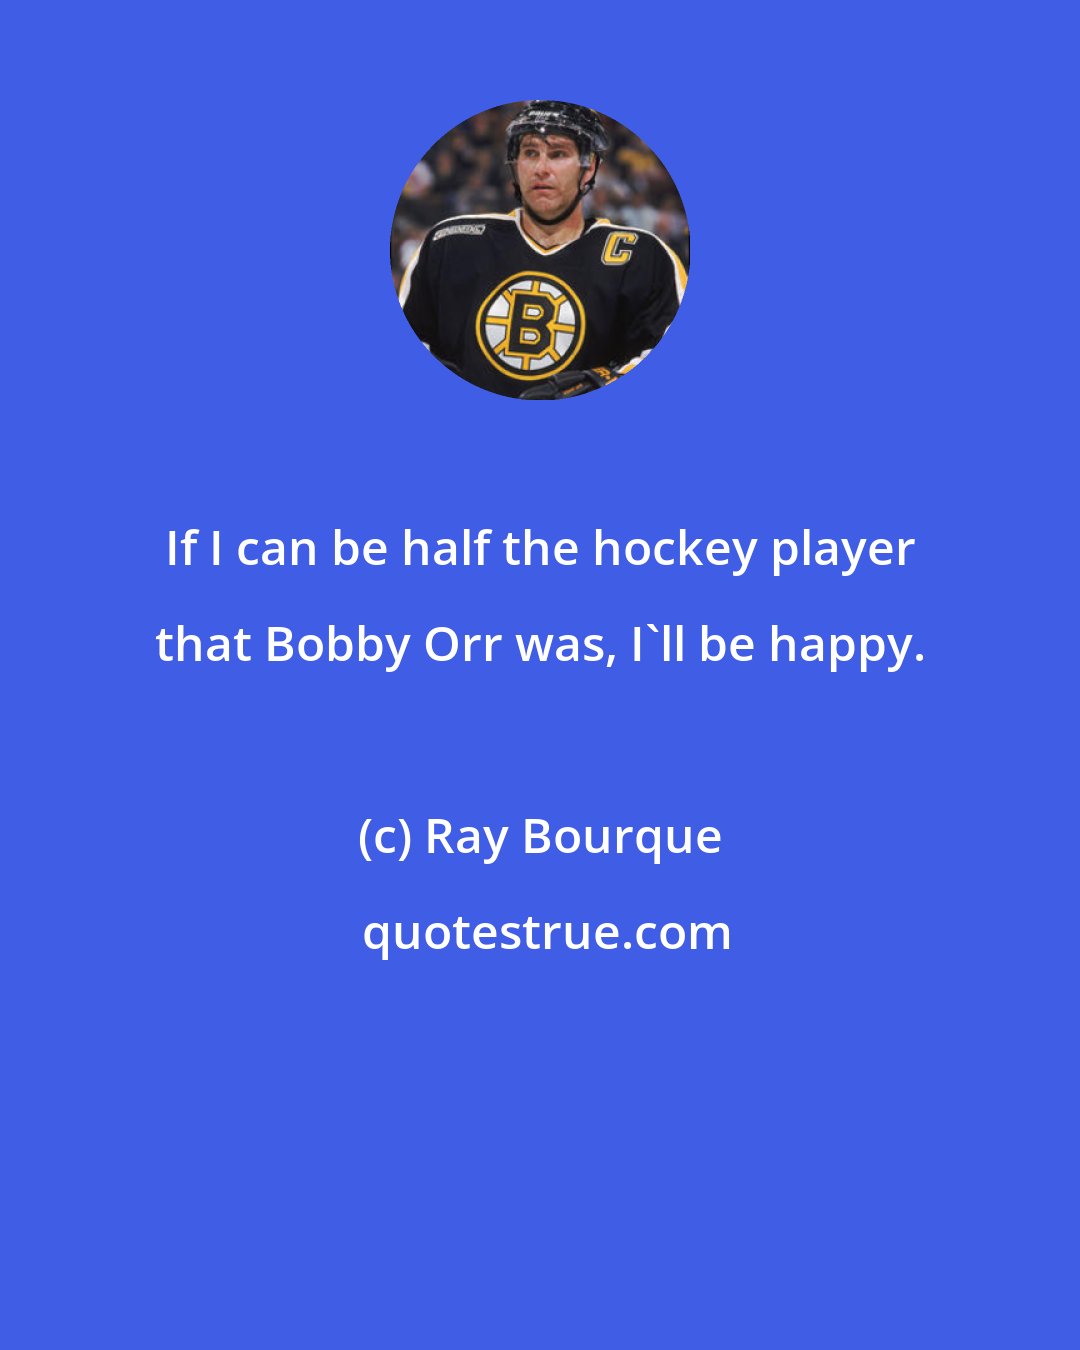 Ray Bourque: If I can be half the hockey player that Bobby Orr was, I'll be happy.